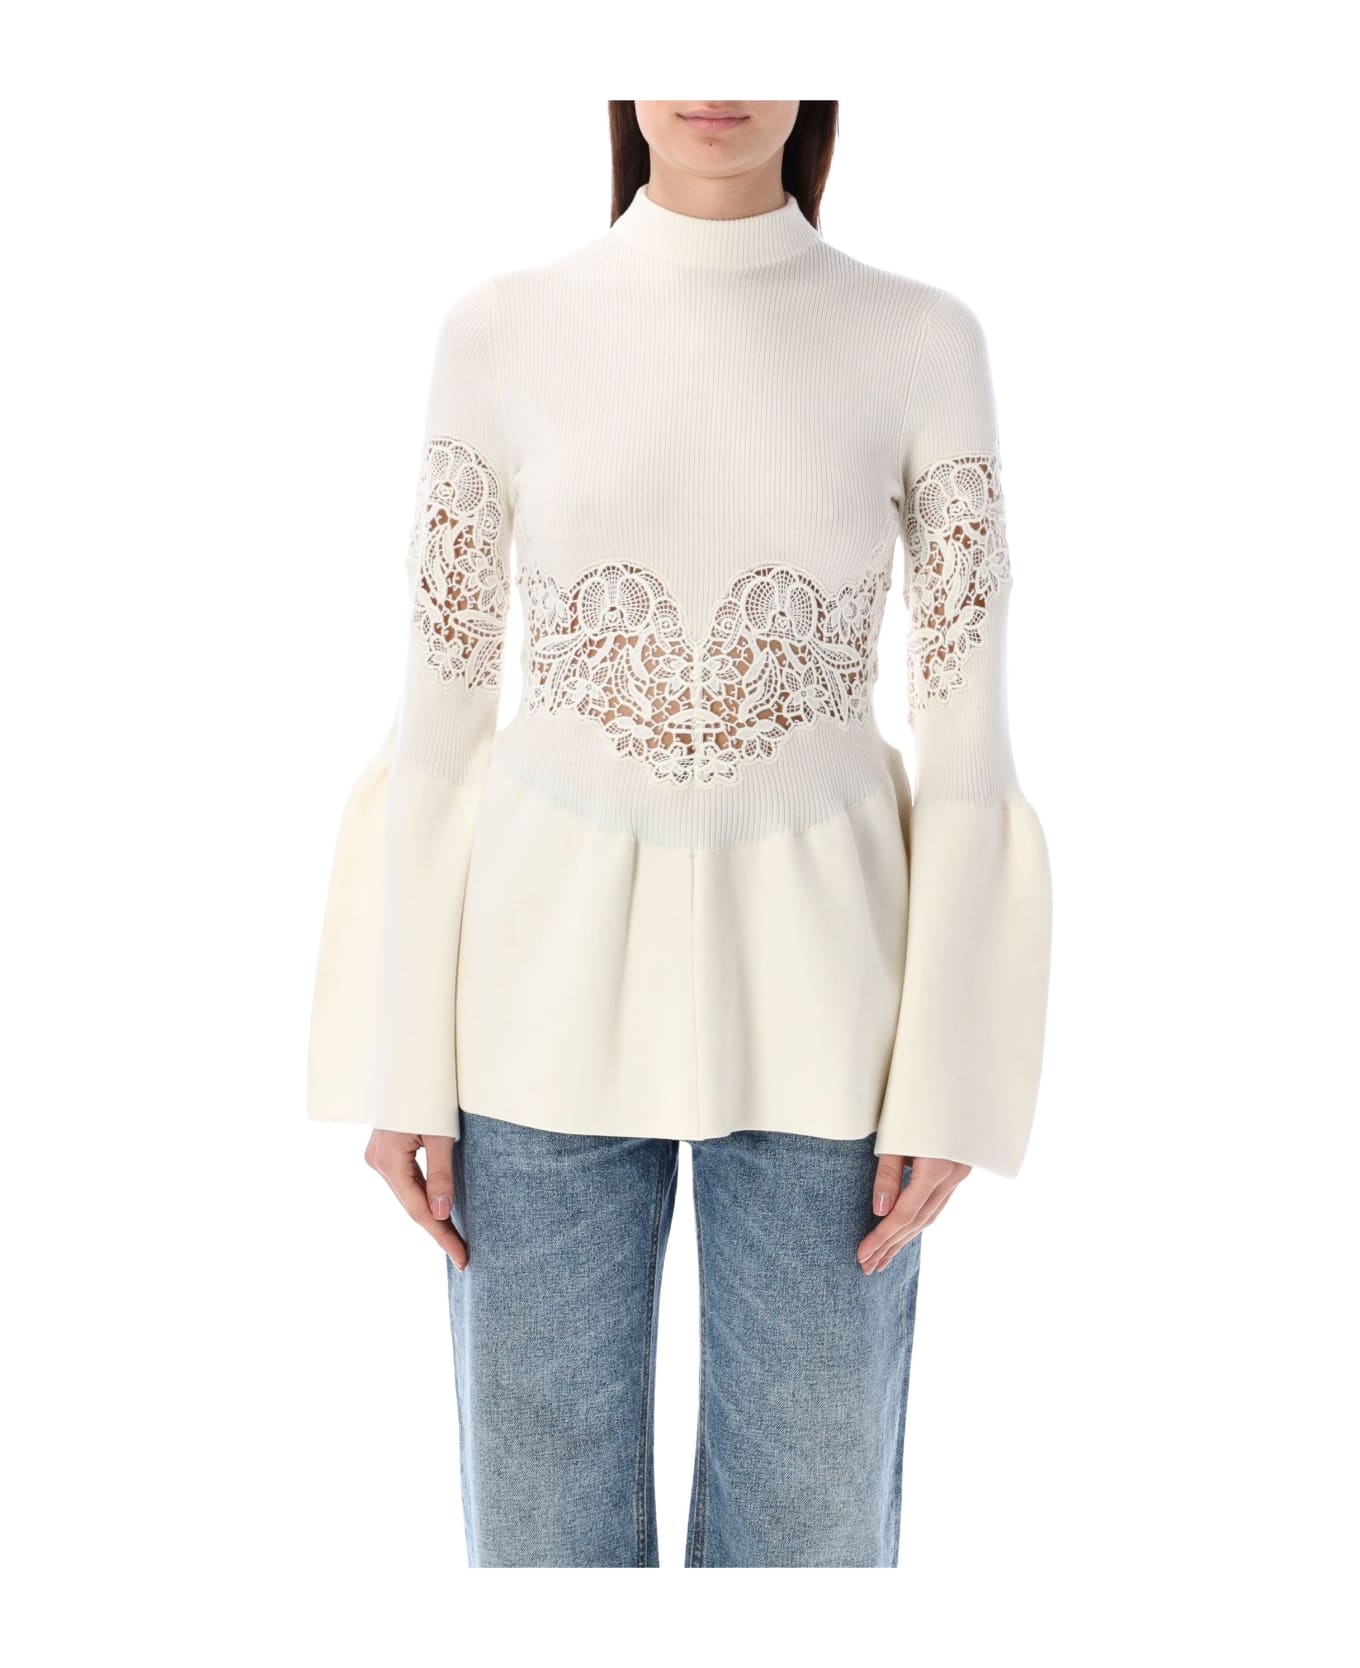 Chloé Lwer-impact Wool Lace Inserts Jumper - ICONIC MILK